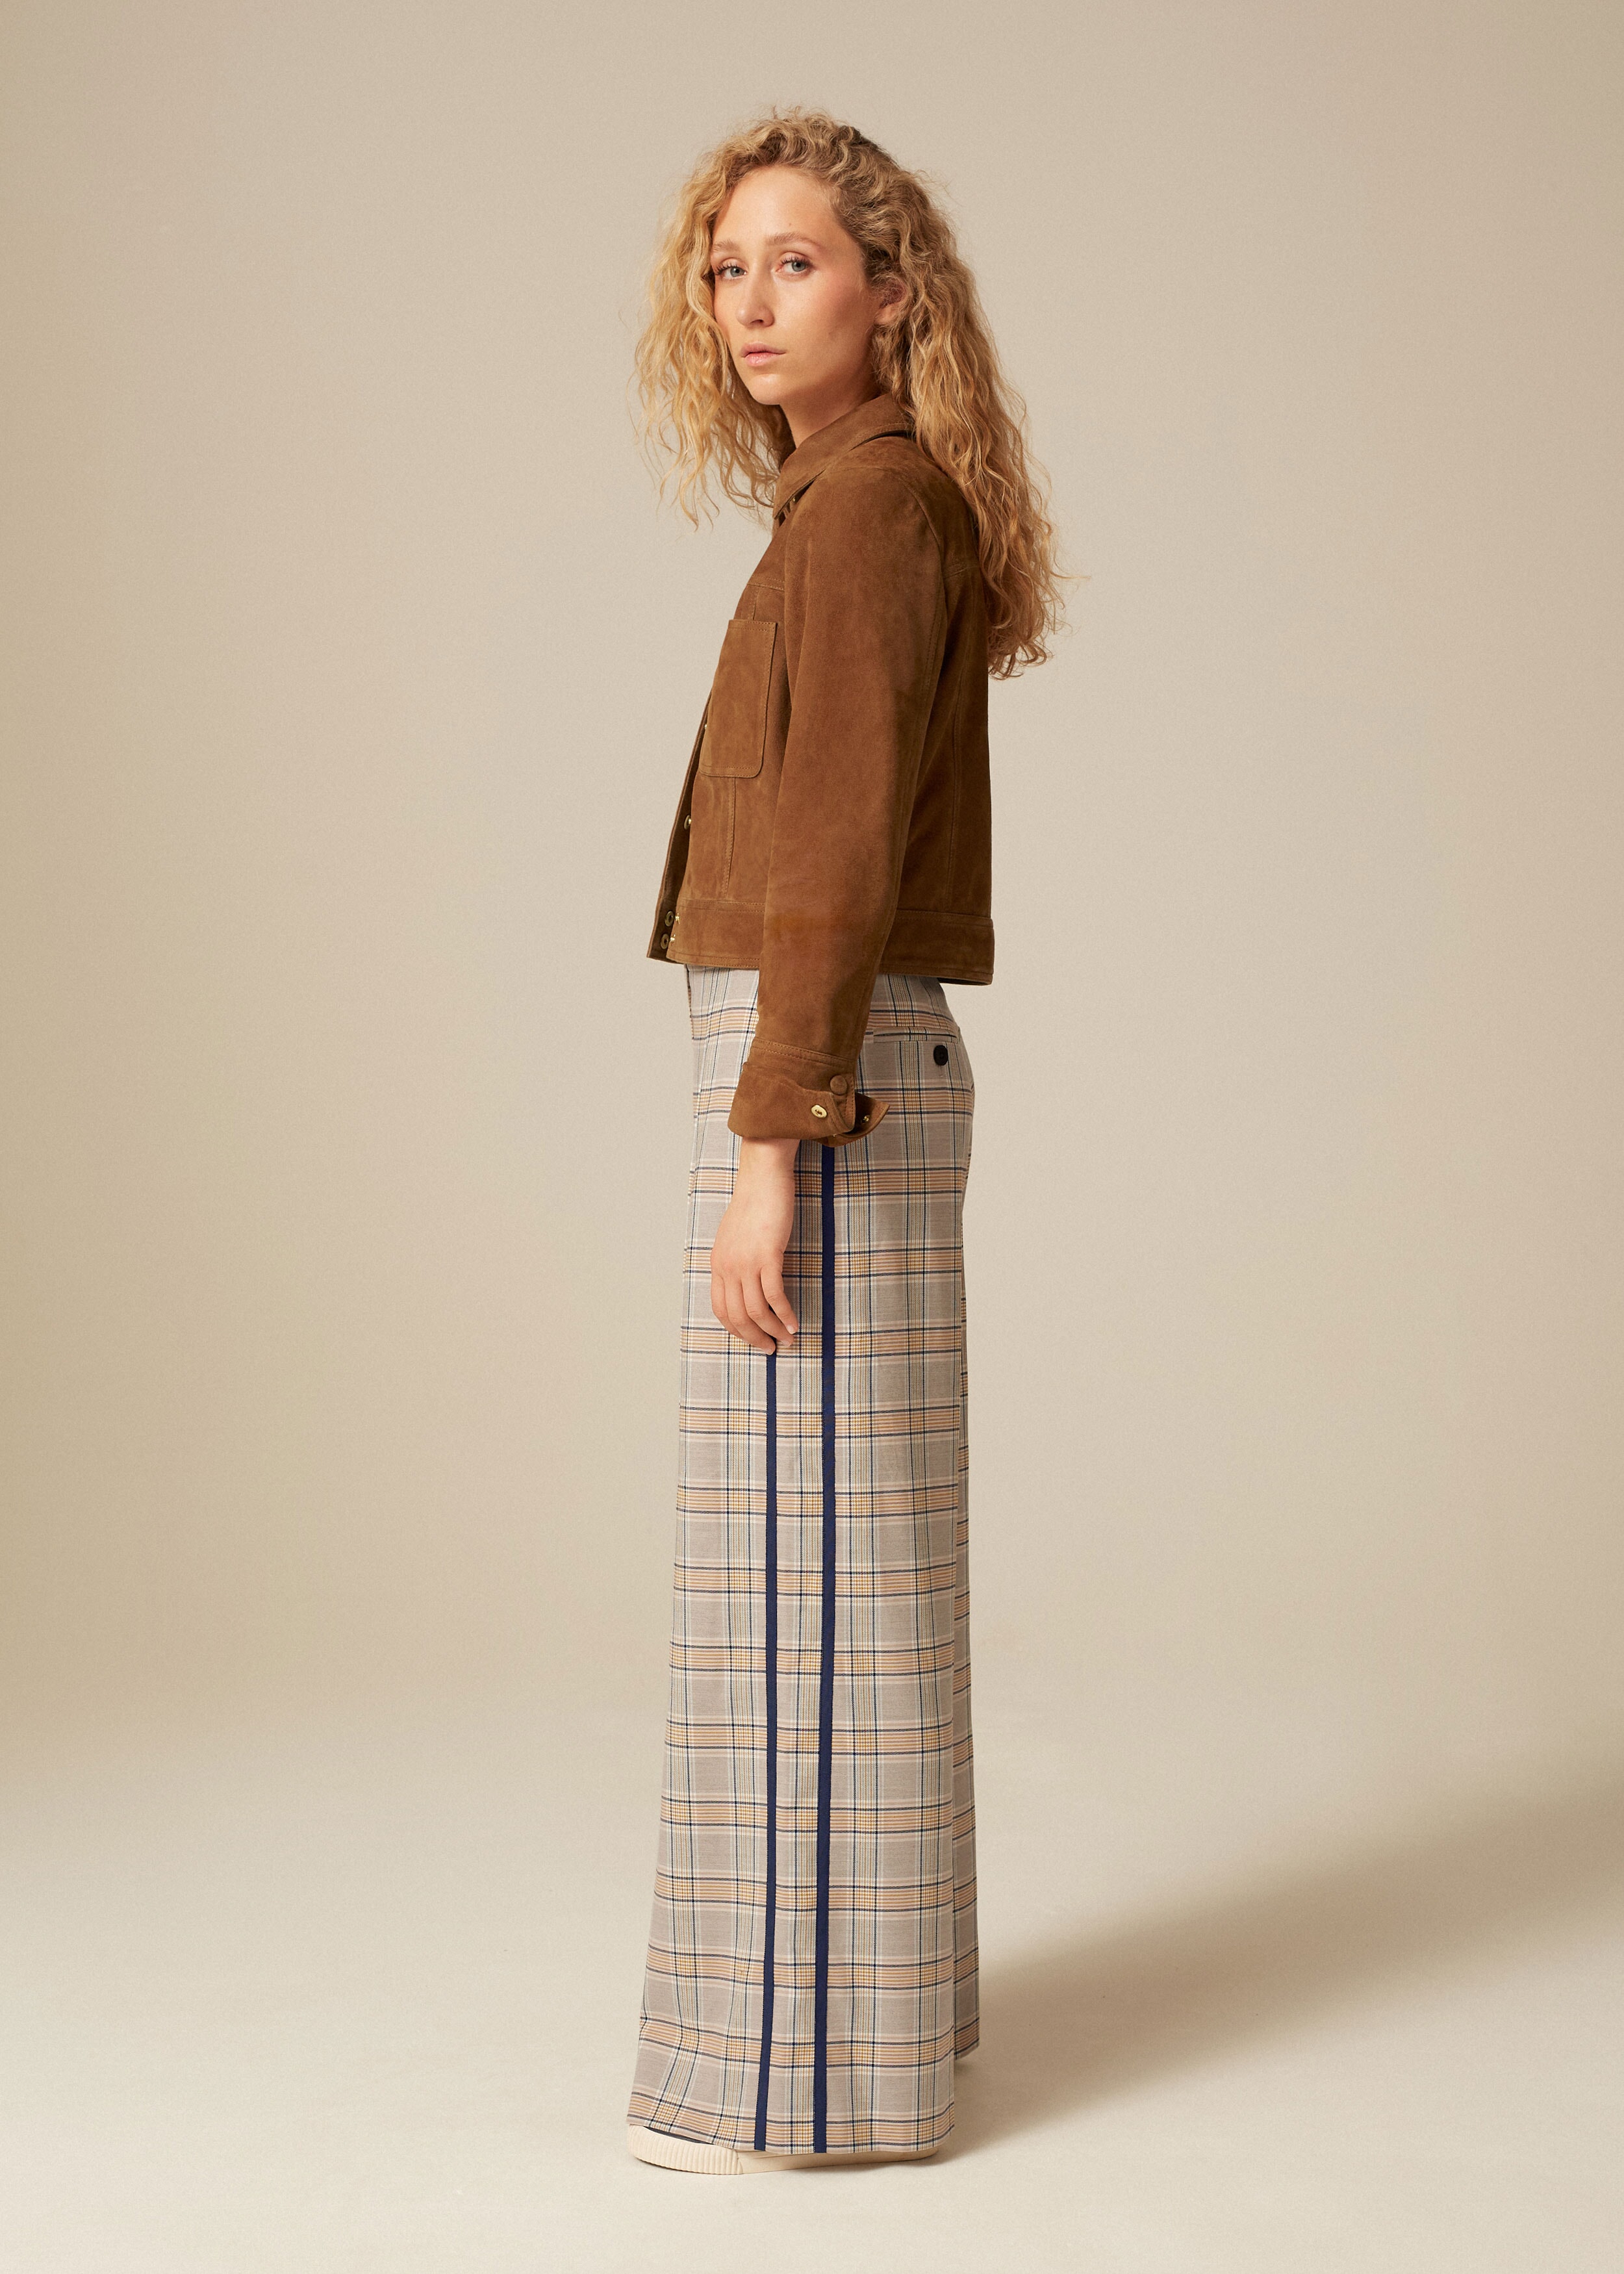 Magliano 18 aw check wide pants-